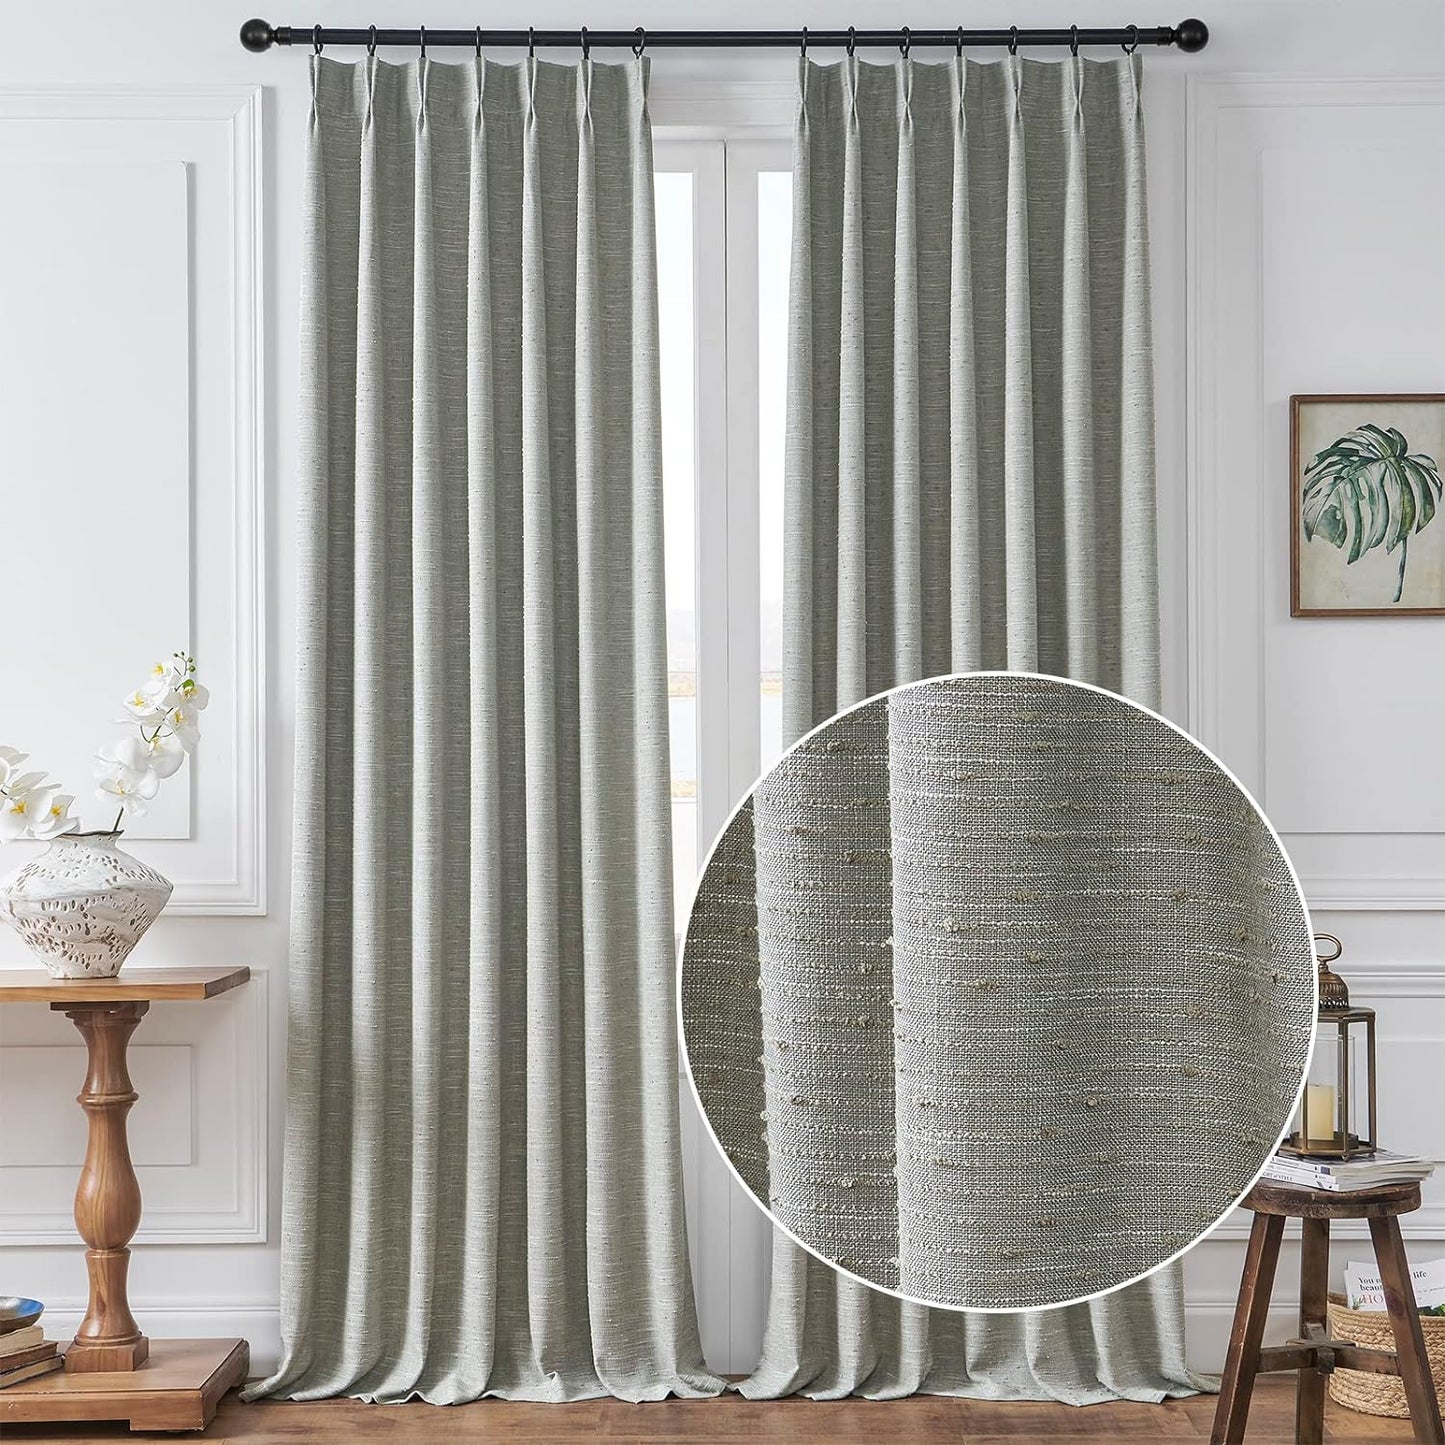 Maison Colette Pinch Pleat White Natural Linen Curtain 84 Inches Length for Bedroom,Back Tab Semi Sheer Window Treatment Drapes for Living Room,2 Panels,40" Width  Maison Colette Home Grey 40"W X 84"L 